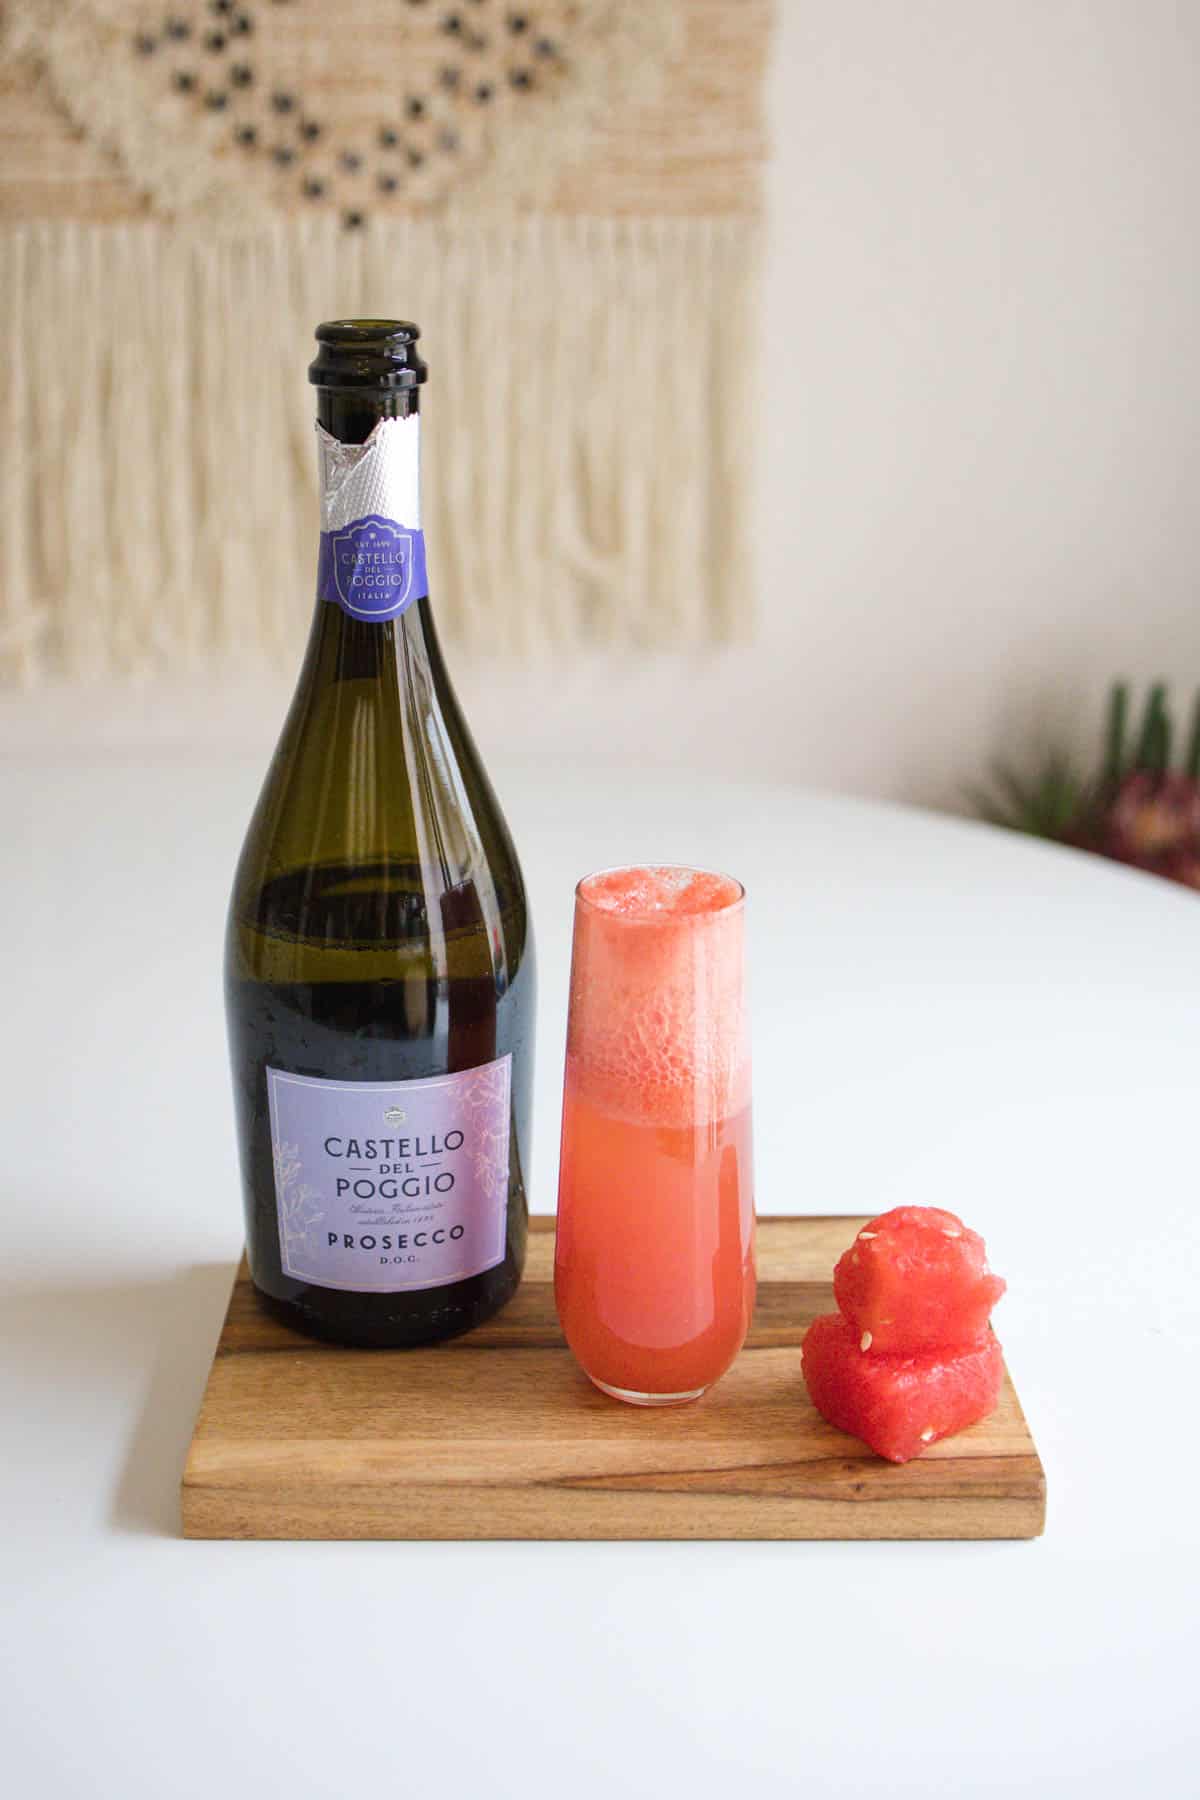 How to make Mimosas - Champagne cocktail